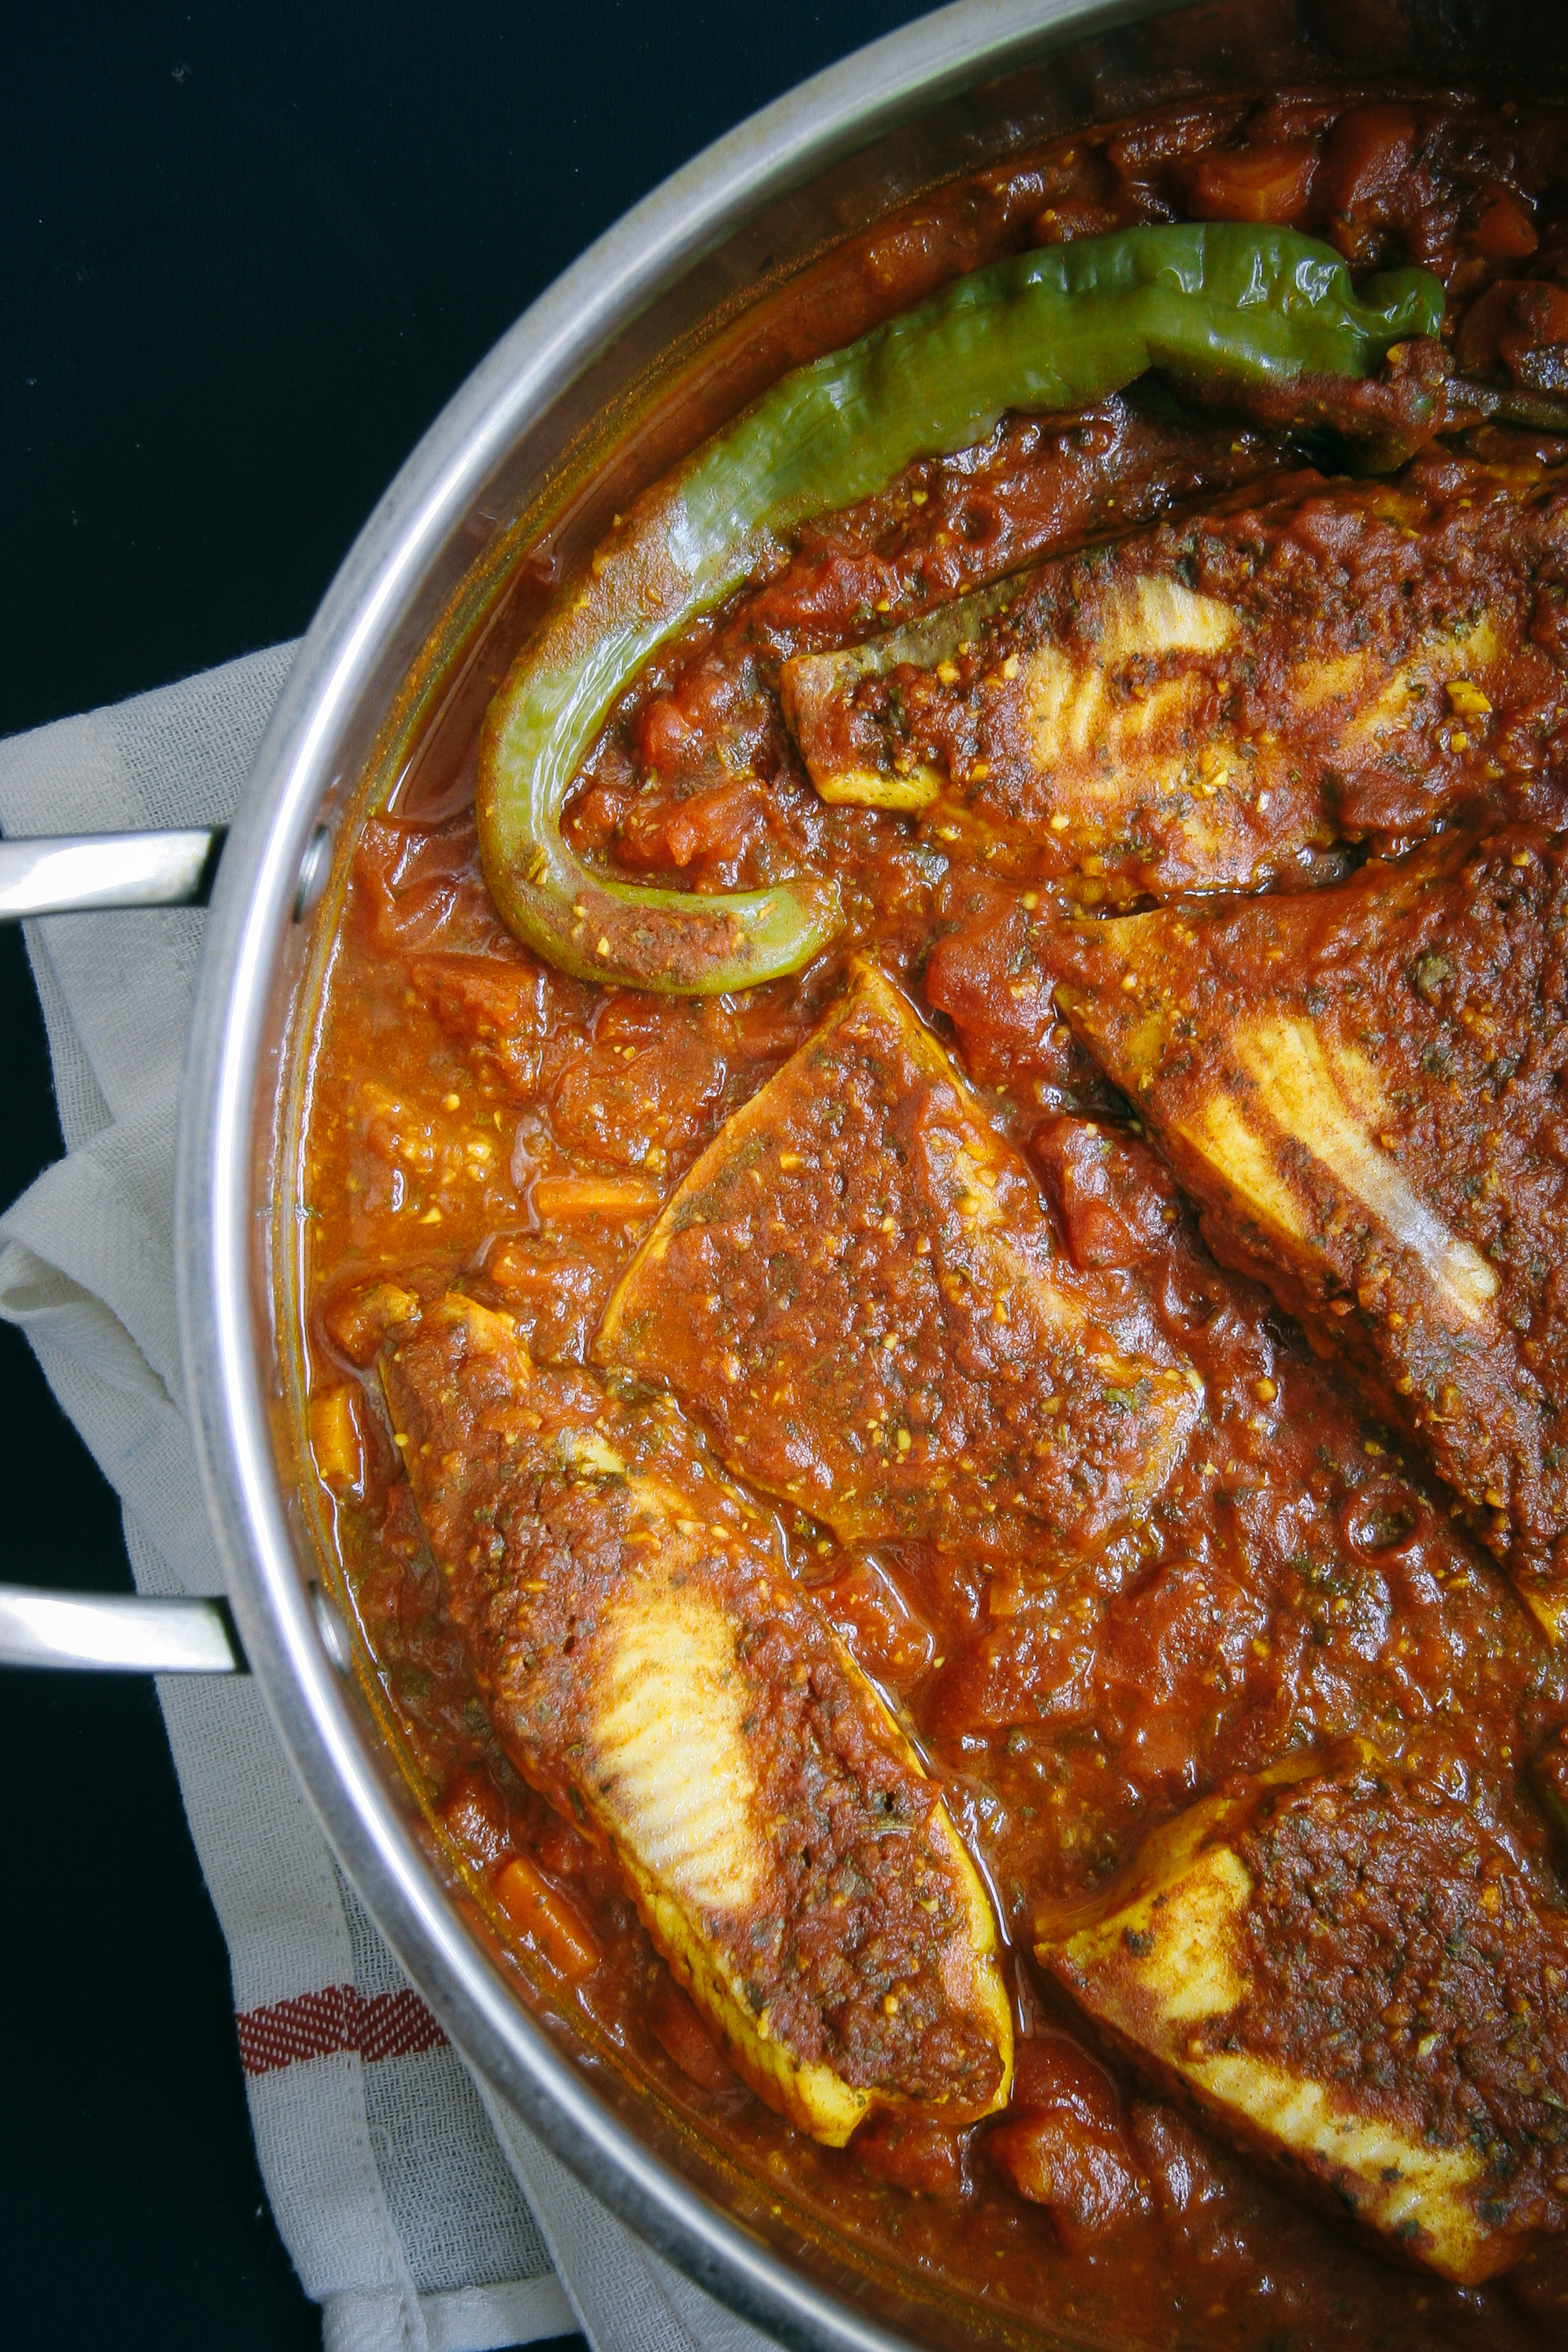 Spicy Moroccan Fish - I Will Not Eat Oysters